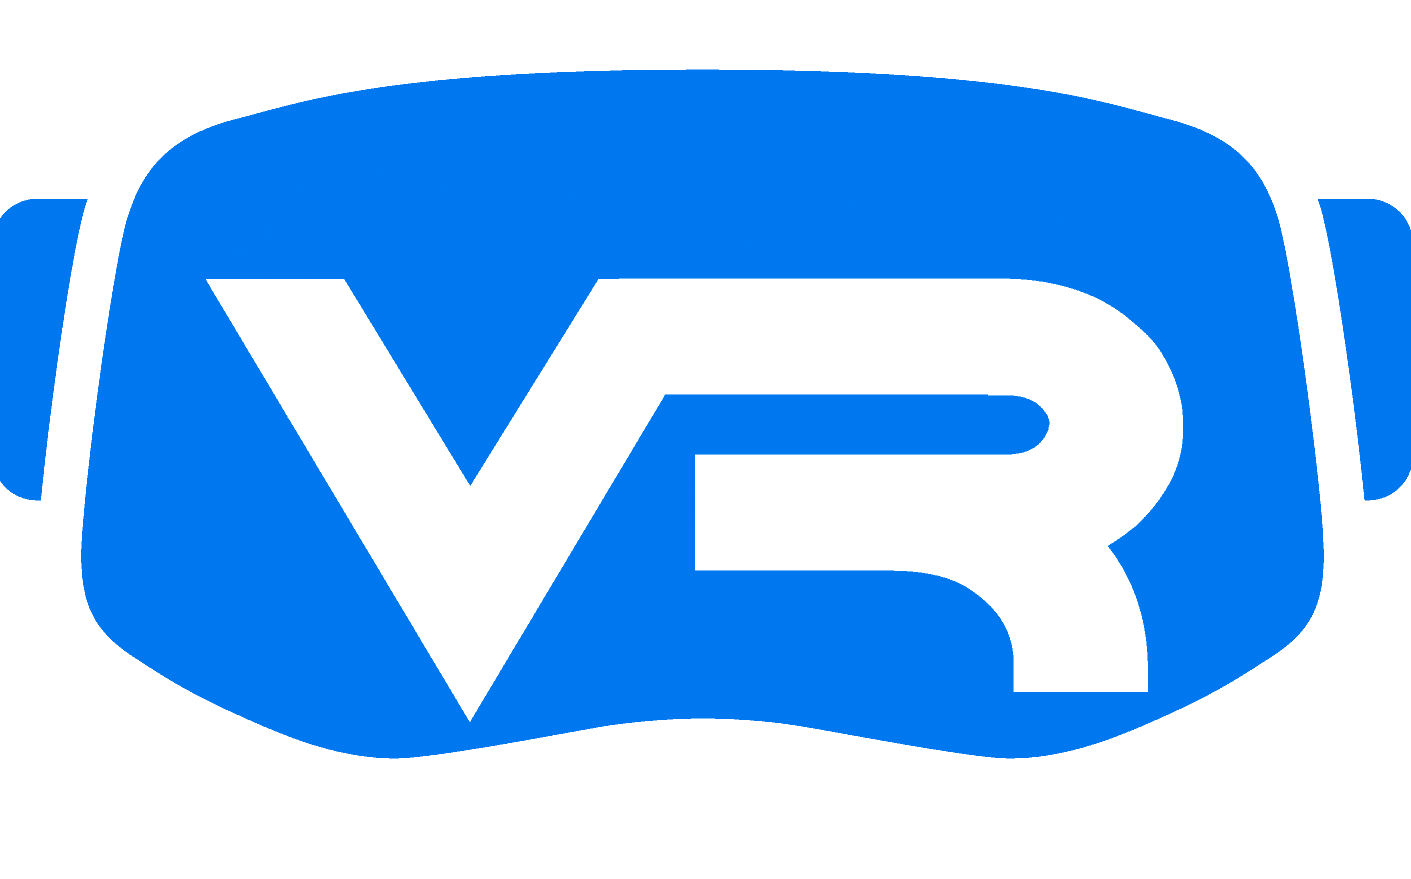 VR logo on a blue background with huge discounts on VR porn.